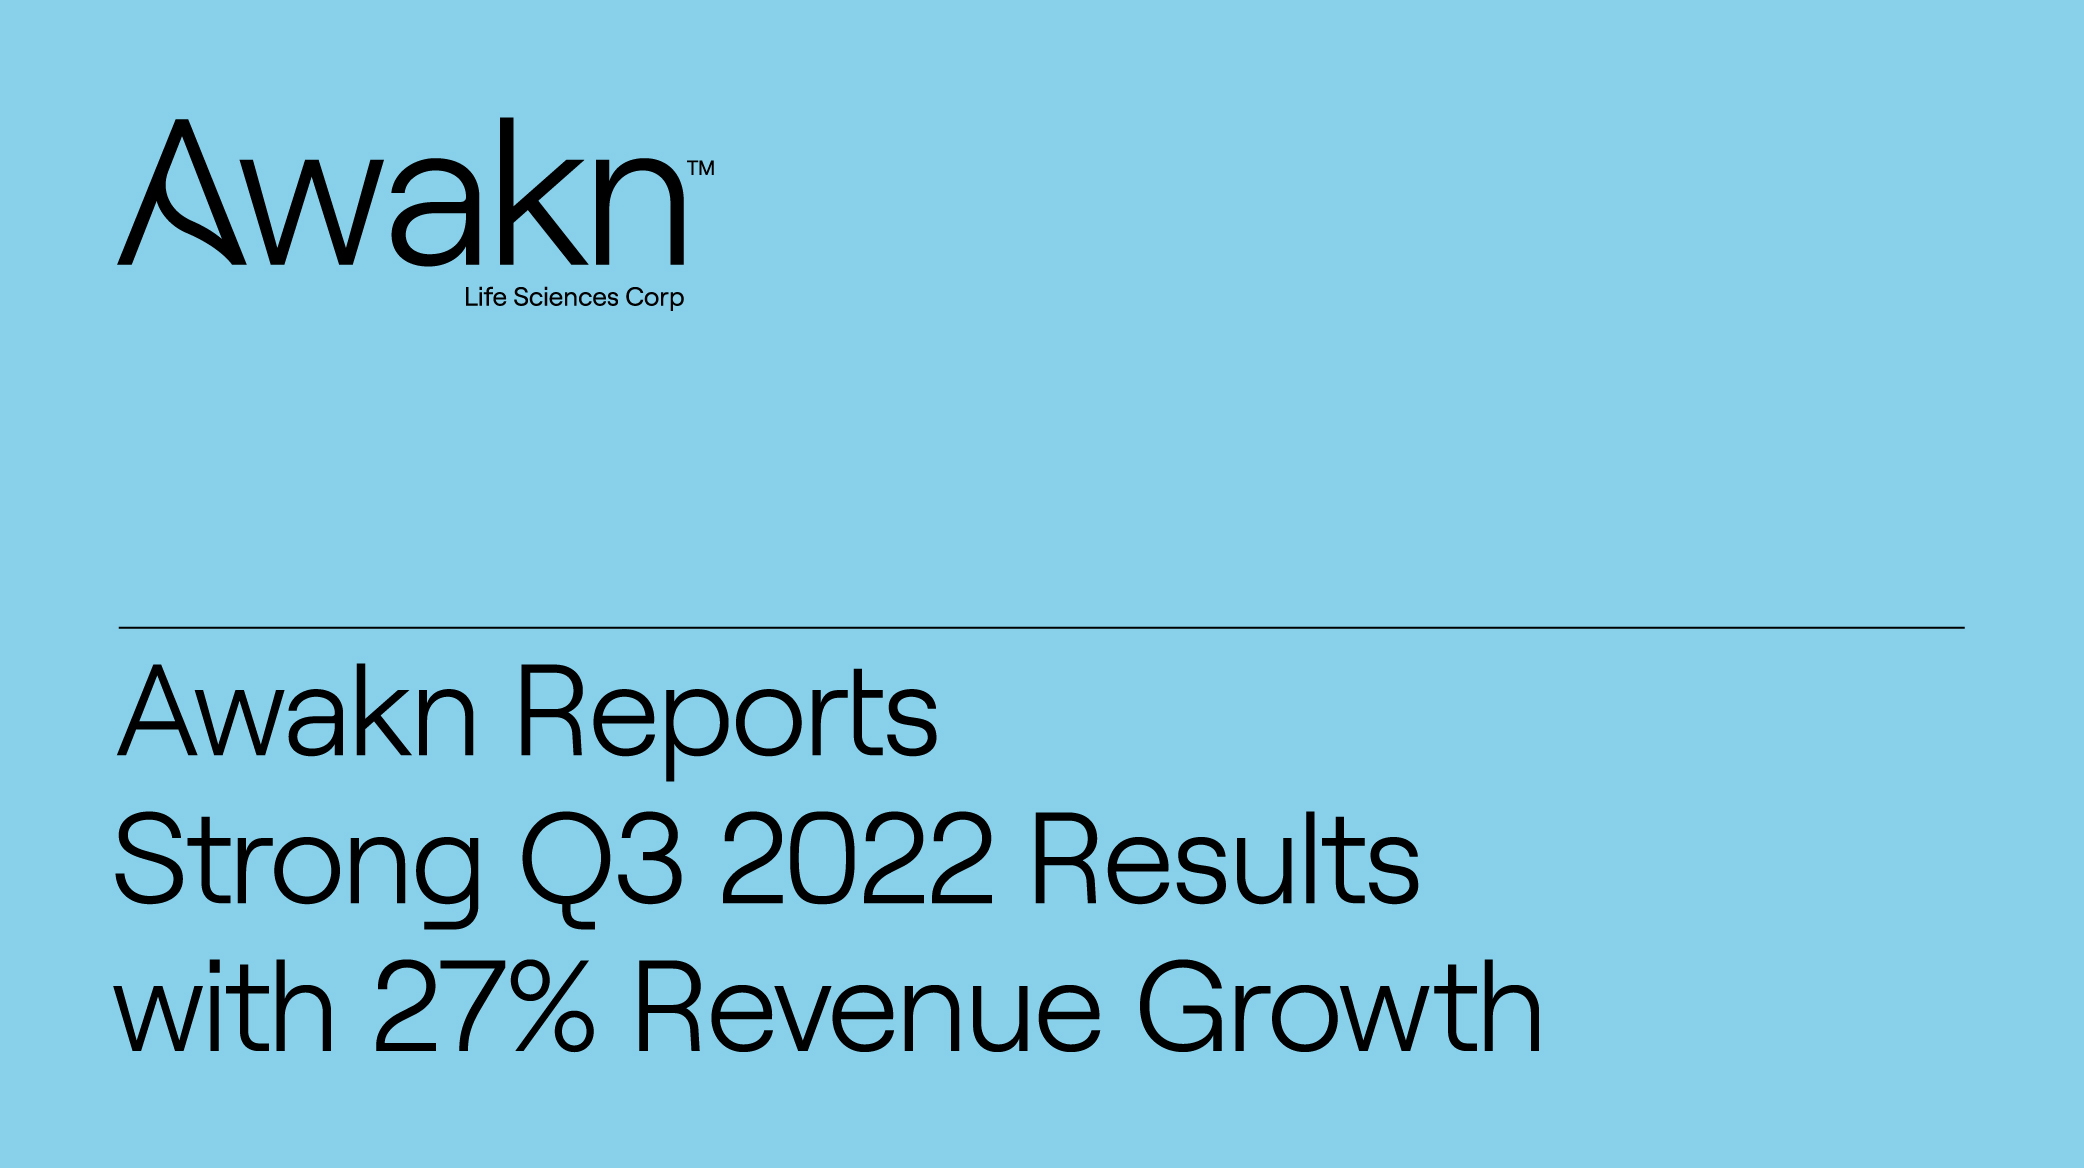 Awakn Life Sciences Reports Strong Q3 2022 Results with 27% Revenue Growth